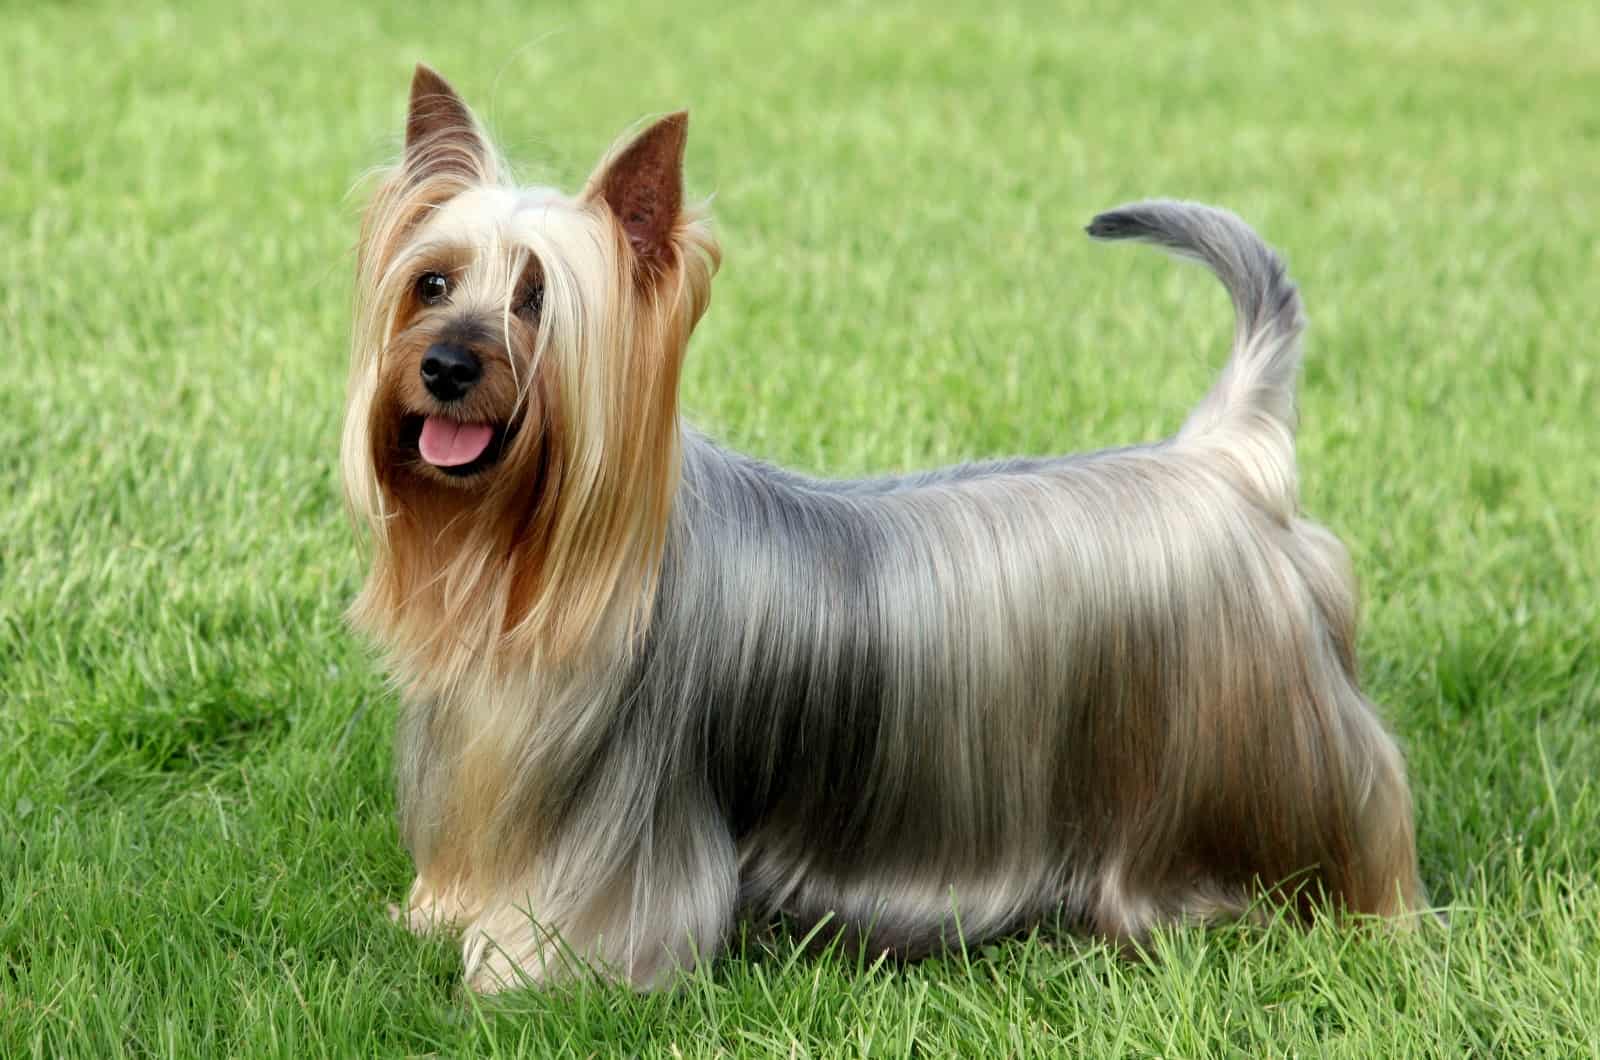 Silky Terrier standing on grass posing for photo